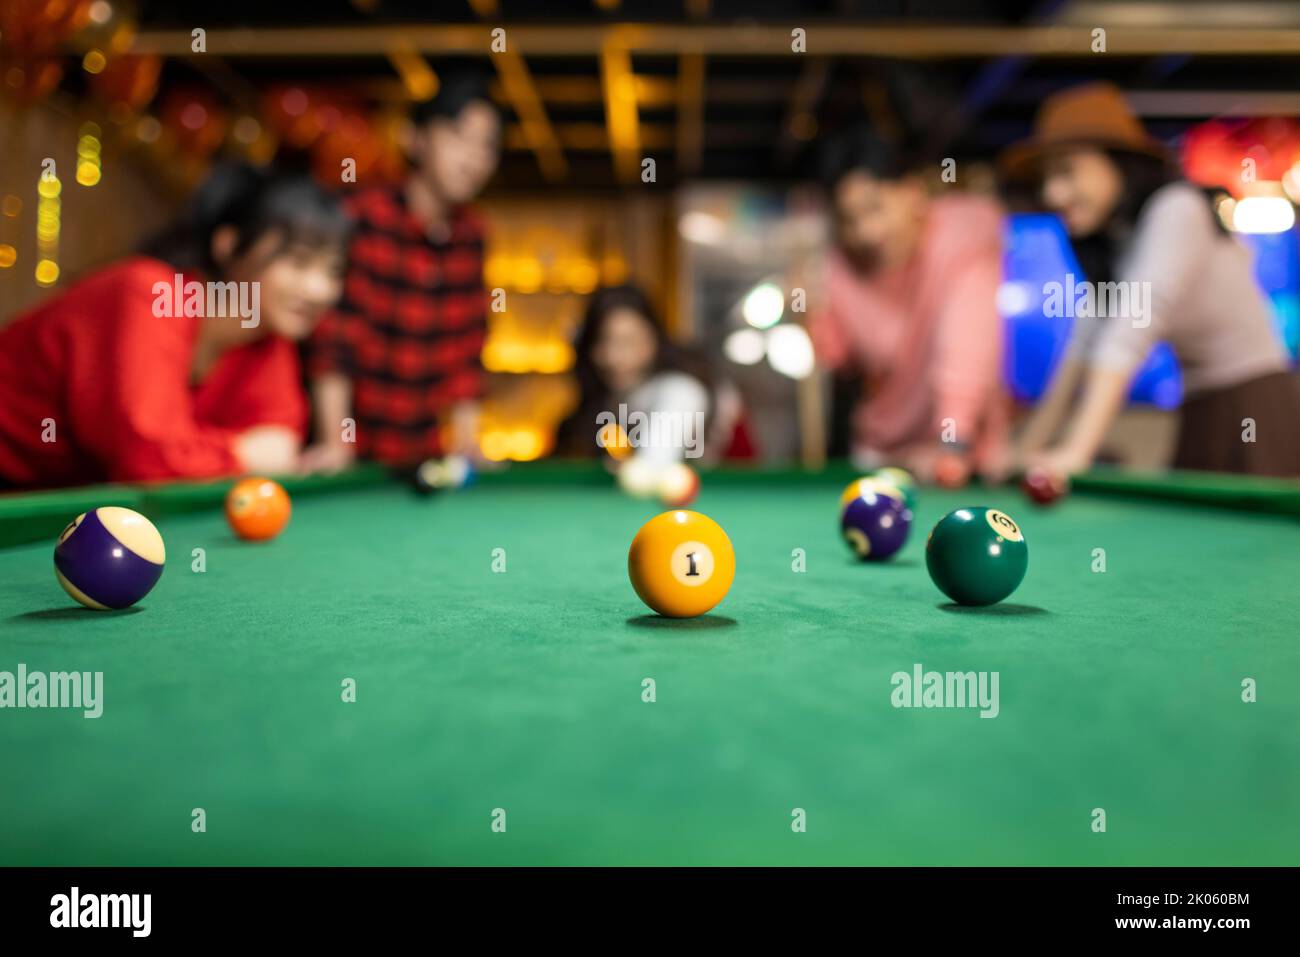 Happy young Chinese friends playing billiard together Stock Photo